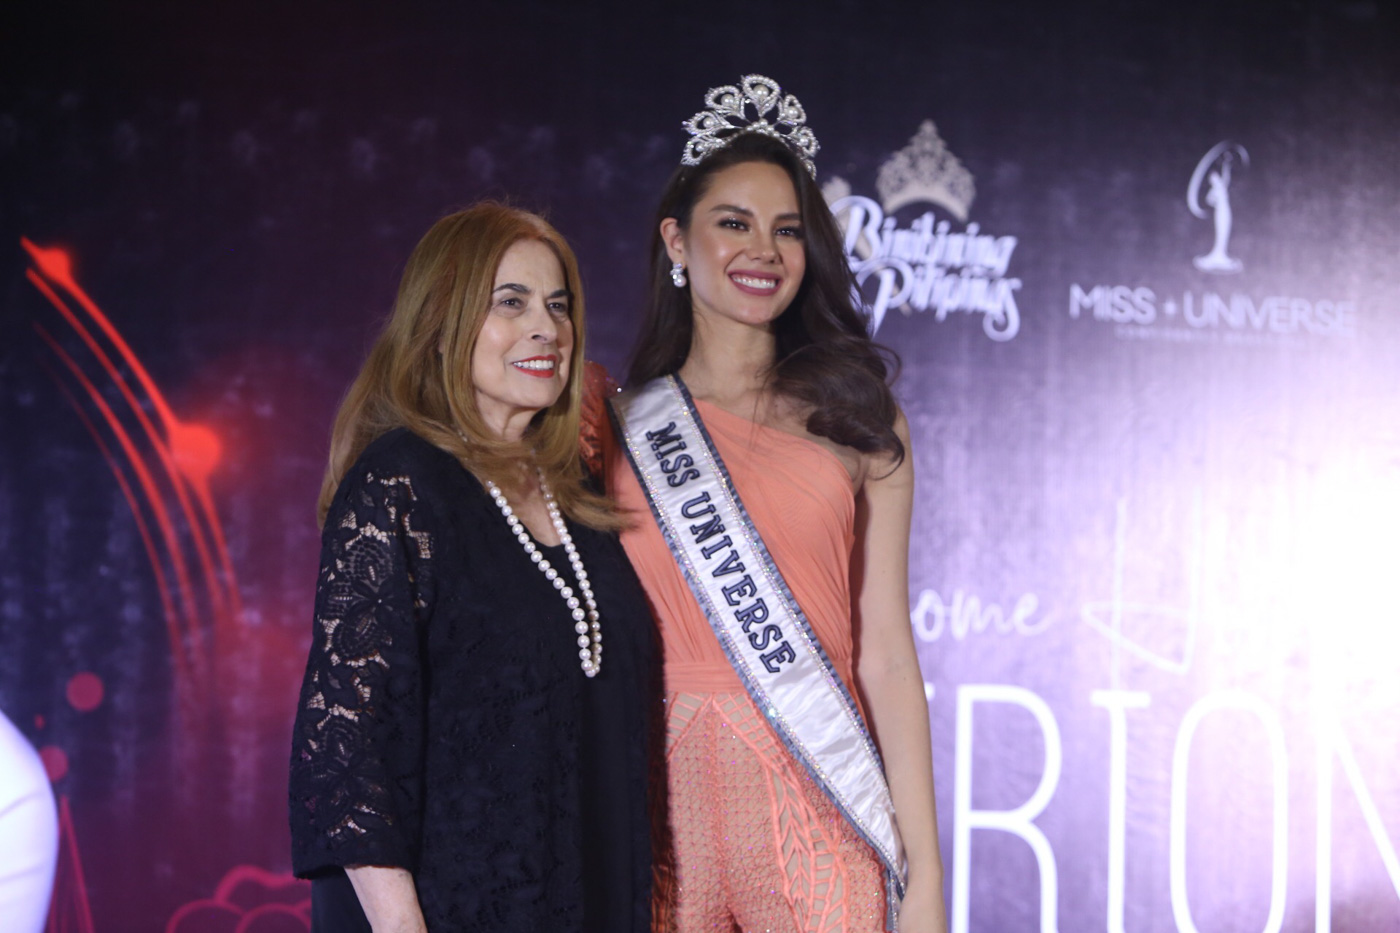 STILL BPCI. The Miss Universe Organization confirms that the Miss Universe Philippines franchise remains with Bb Pilipinas. Photo show Catriona Gray during her homecoming press conference with BPCi chairperson Stella Araneta. Photo by Jory Rivera  